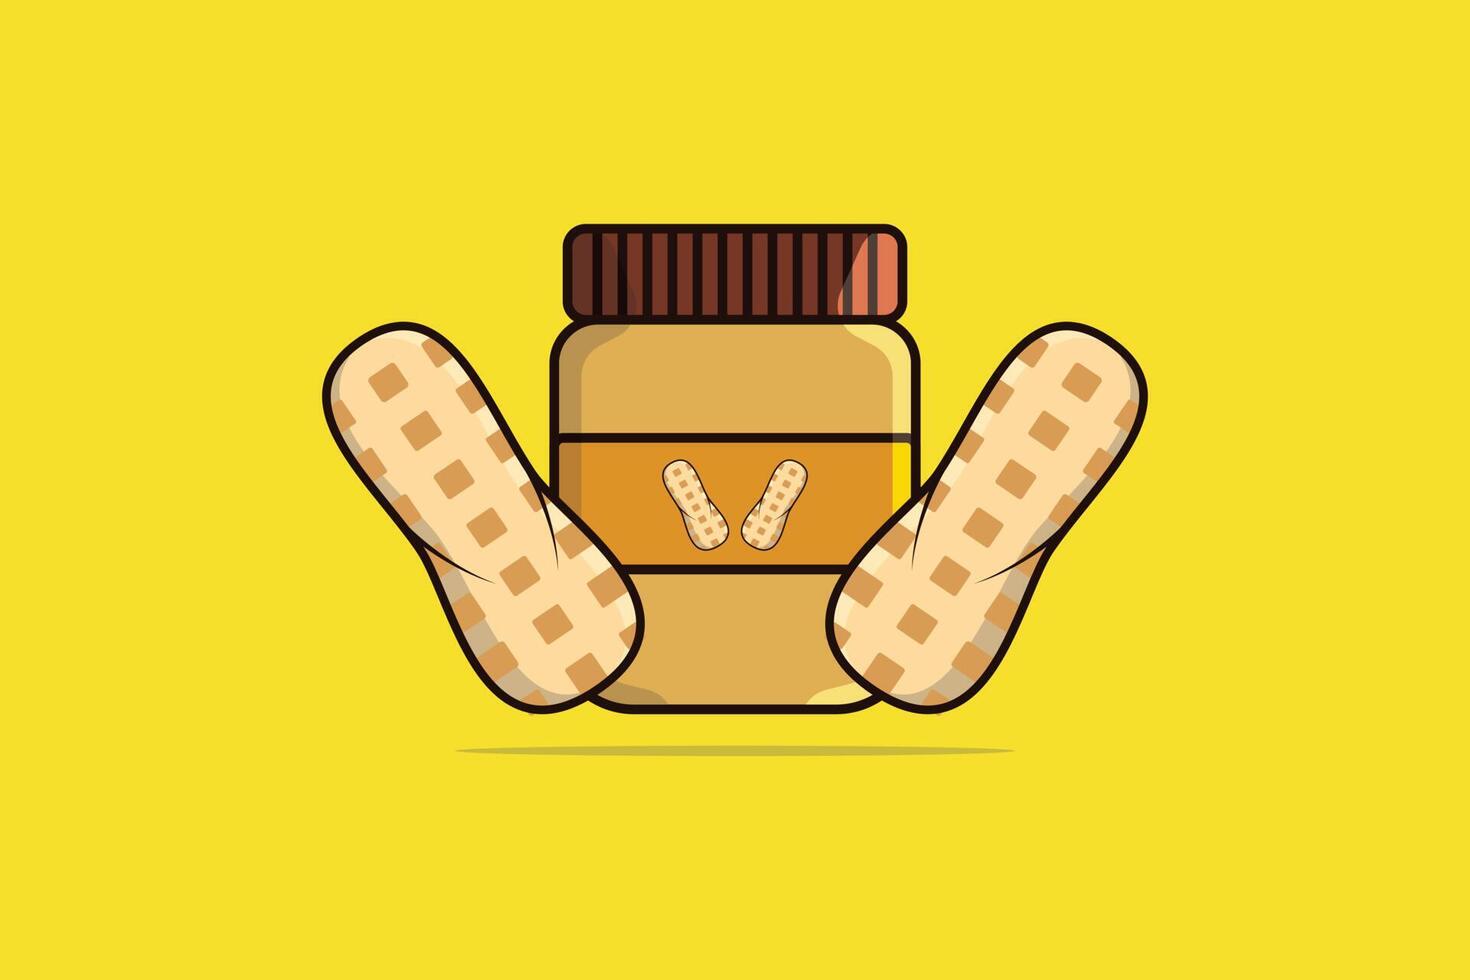 Peanut Butter Jar with Peanuts vector illustration. Food object icon concept. Peanut butter jars with labels. Peanut butter packaging design concept.